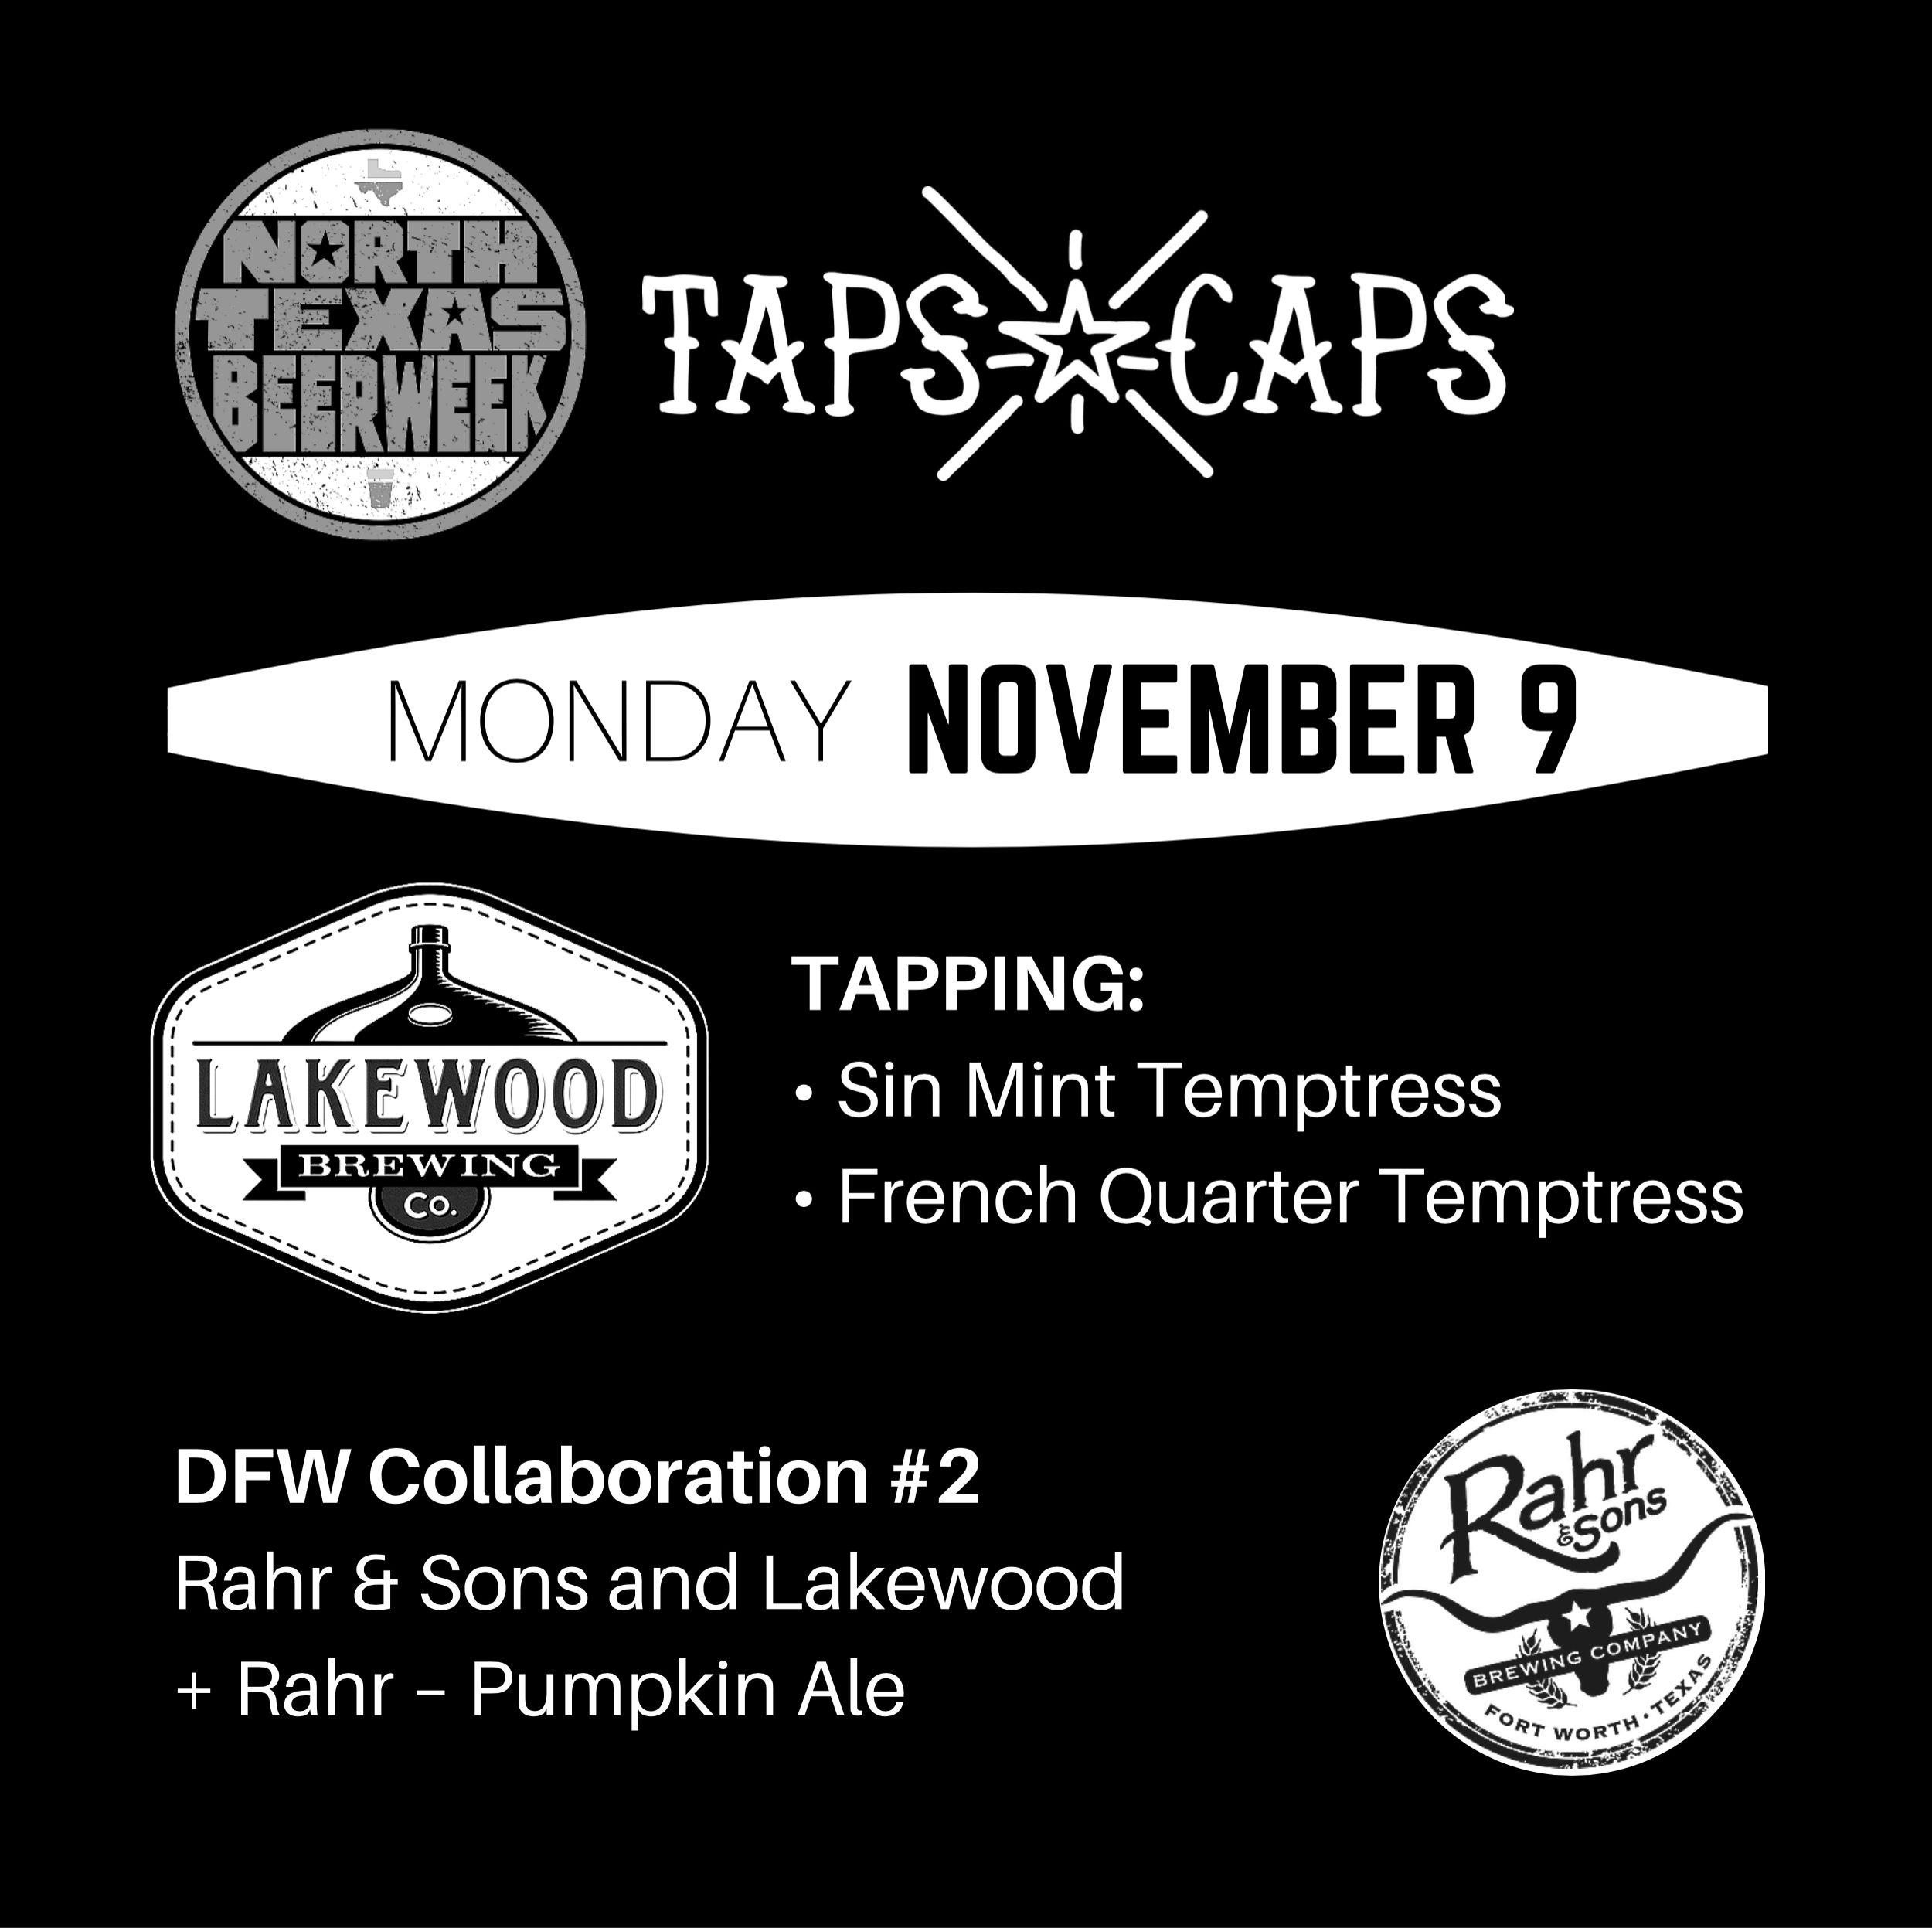 Rahr Logo - Lakewood Brewing Beer Collaboration with Rahr and Sons | Taps & Caps